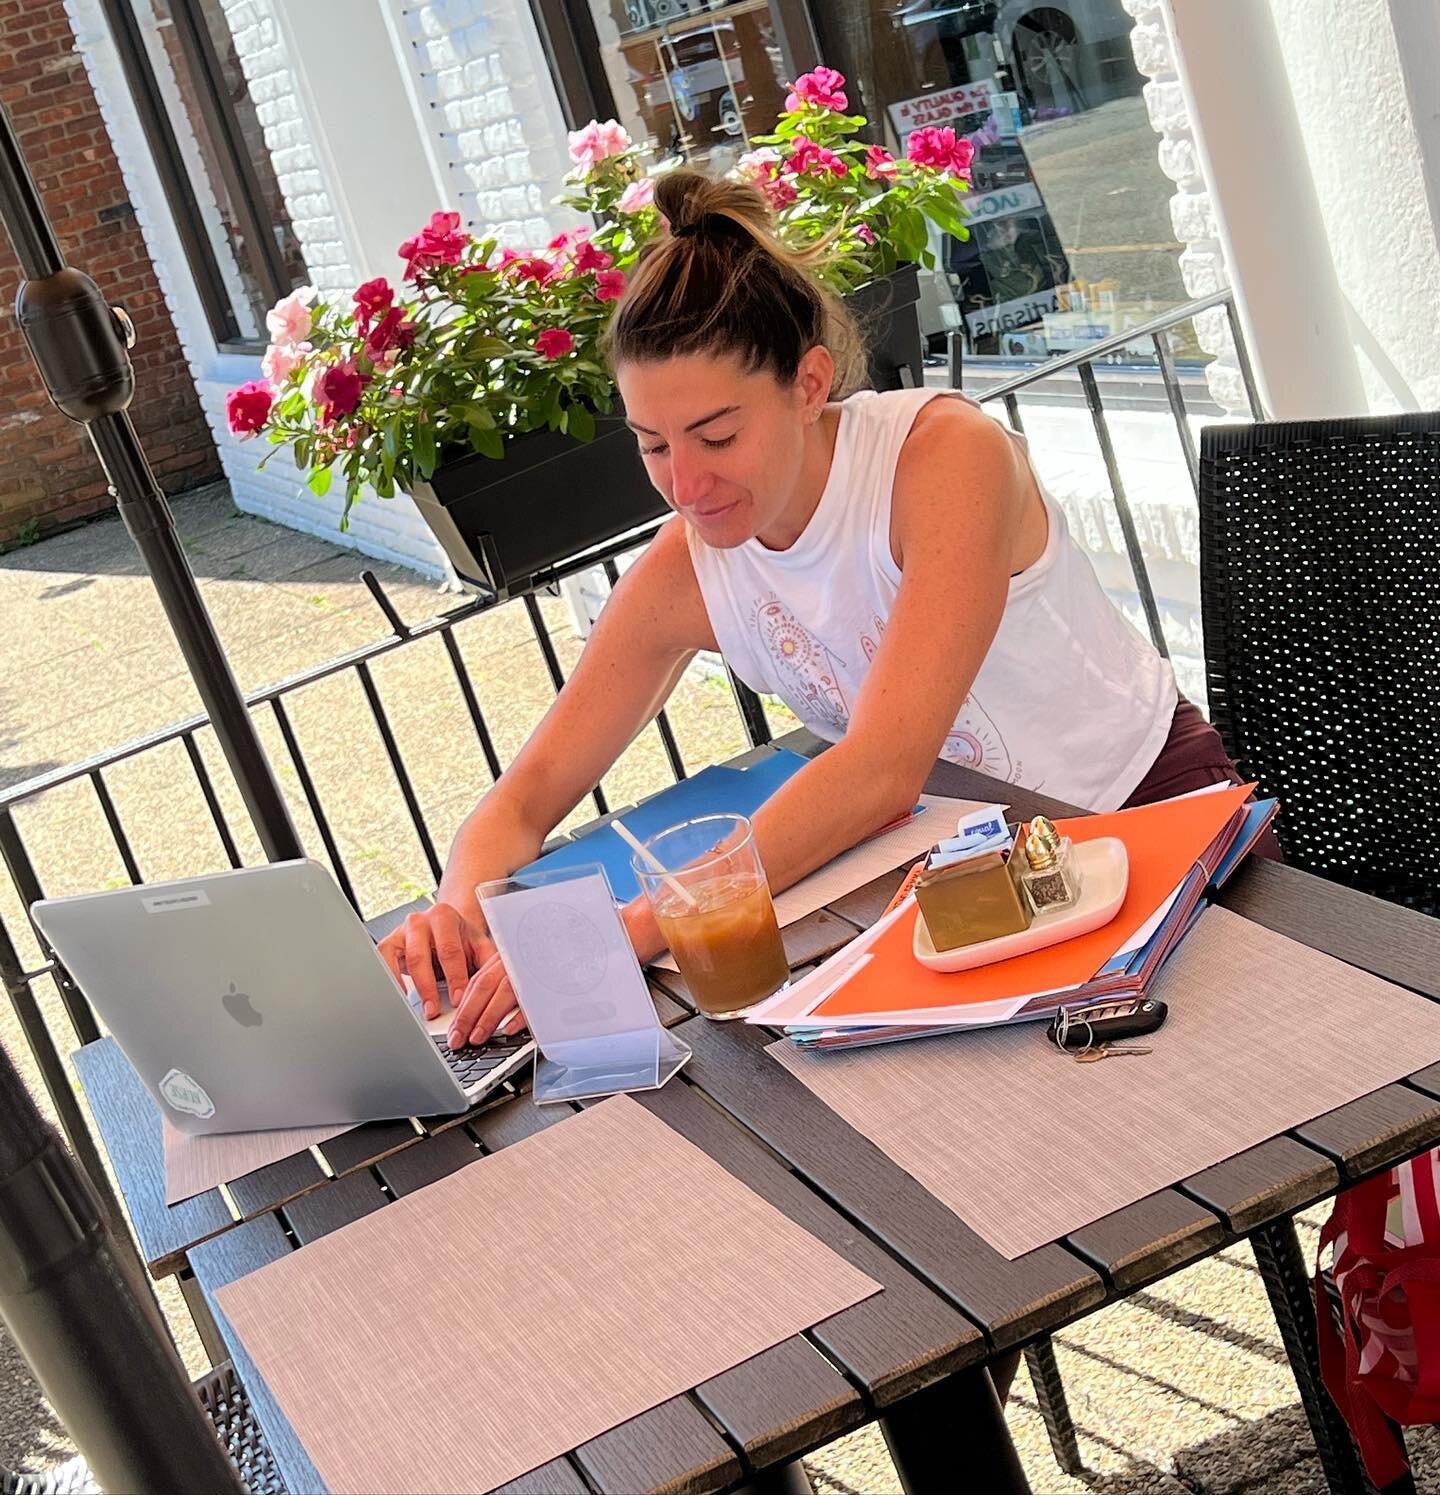 The most perfect weather to sit outside with a cup of Coffee and get some work done ☀️ 
It&rsquo;s almost lunch time, come grab a table and leave the rest to us!! 

#sunshine #happy #illycoffee #workfromhere #workoutdoors #summervibes #fallvibes #cof